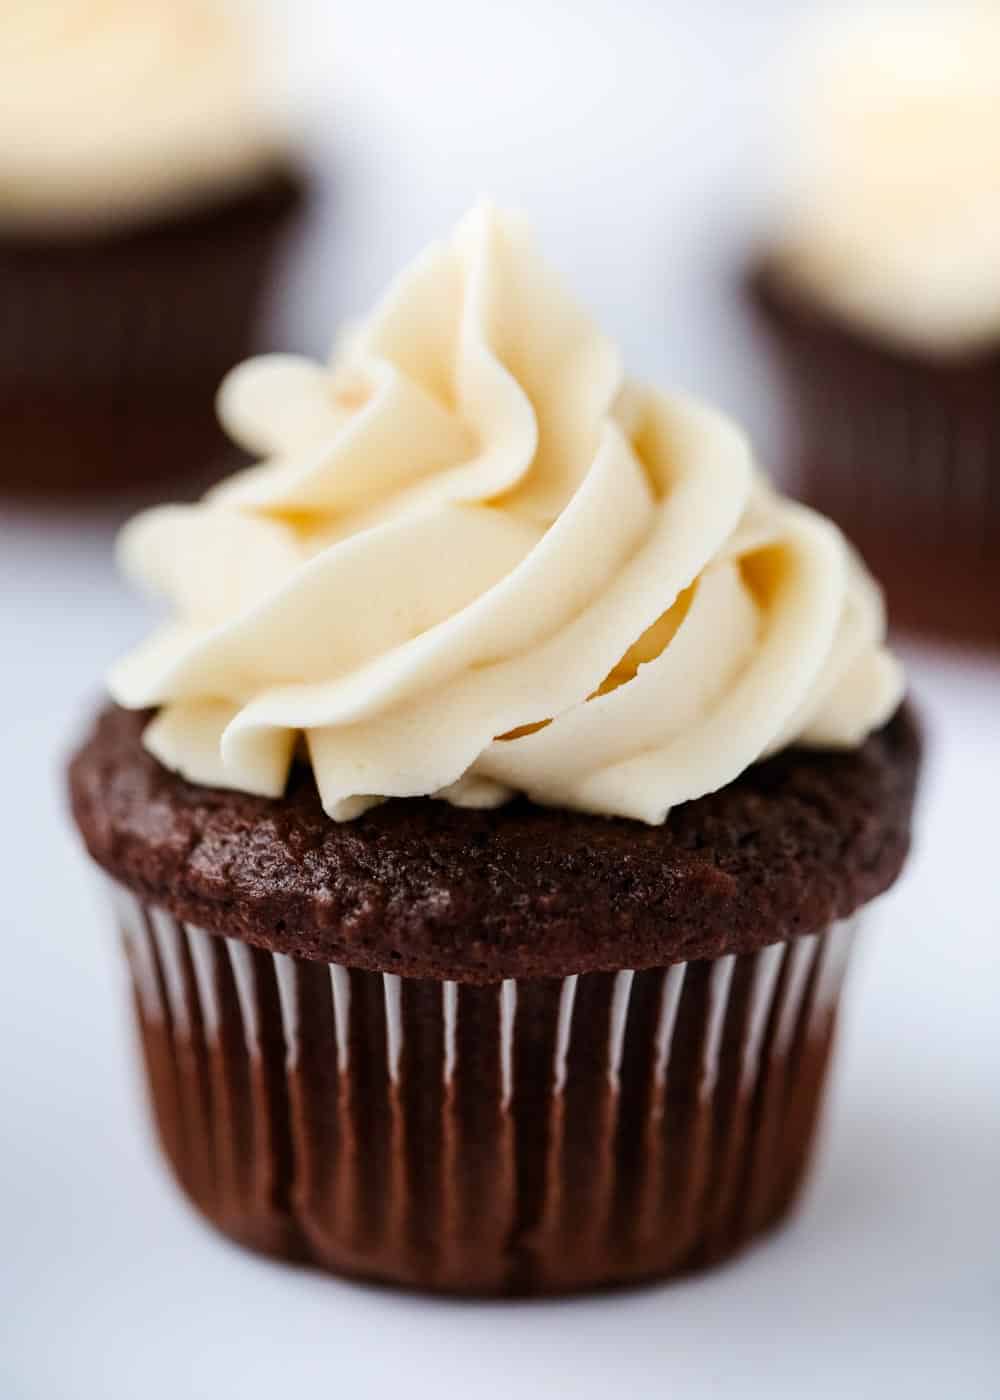 Close up of a chocolate cupcake with buttercream frosting.